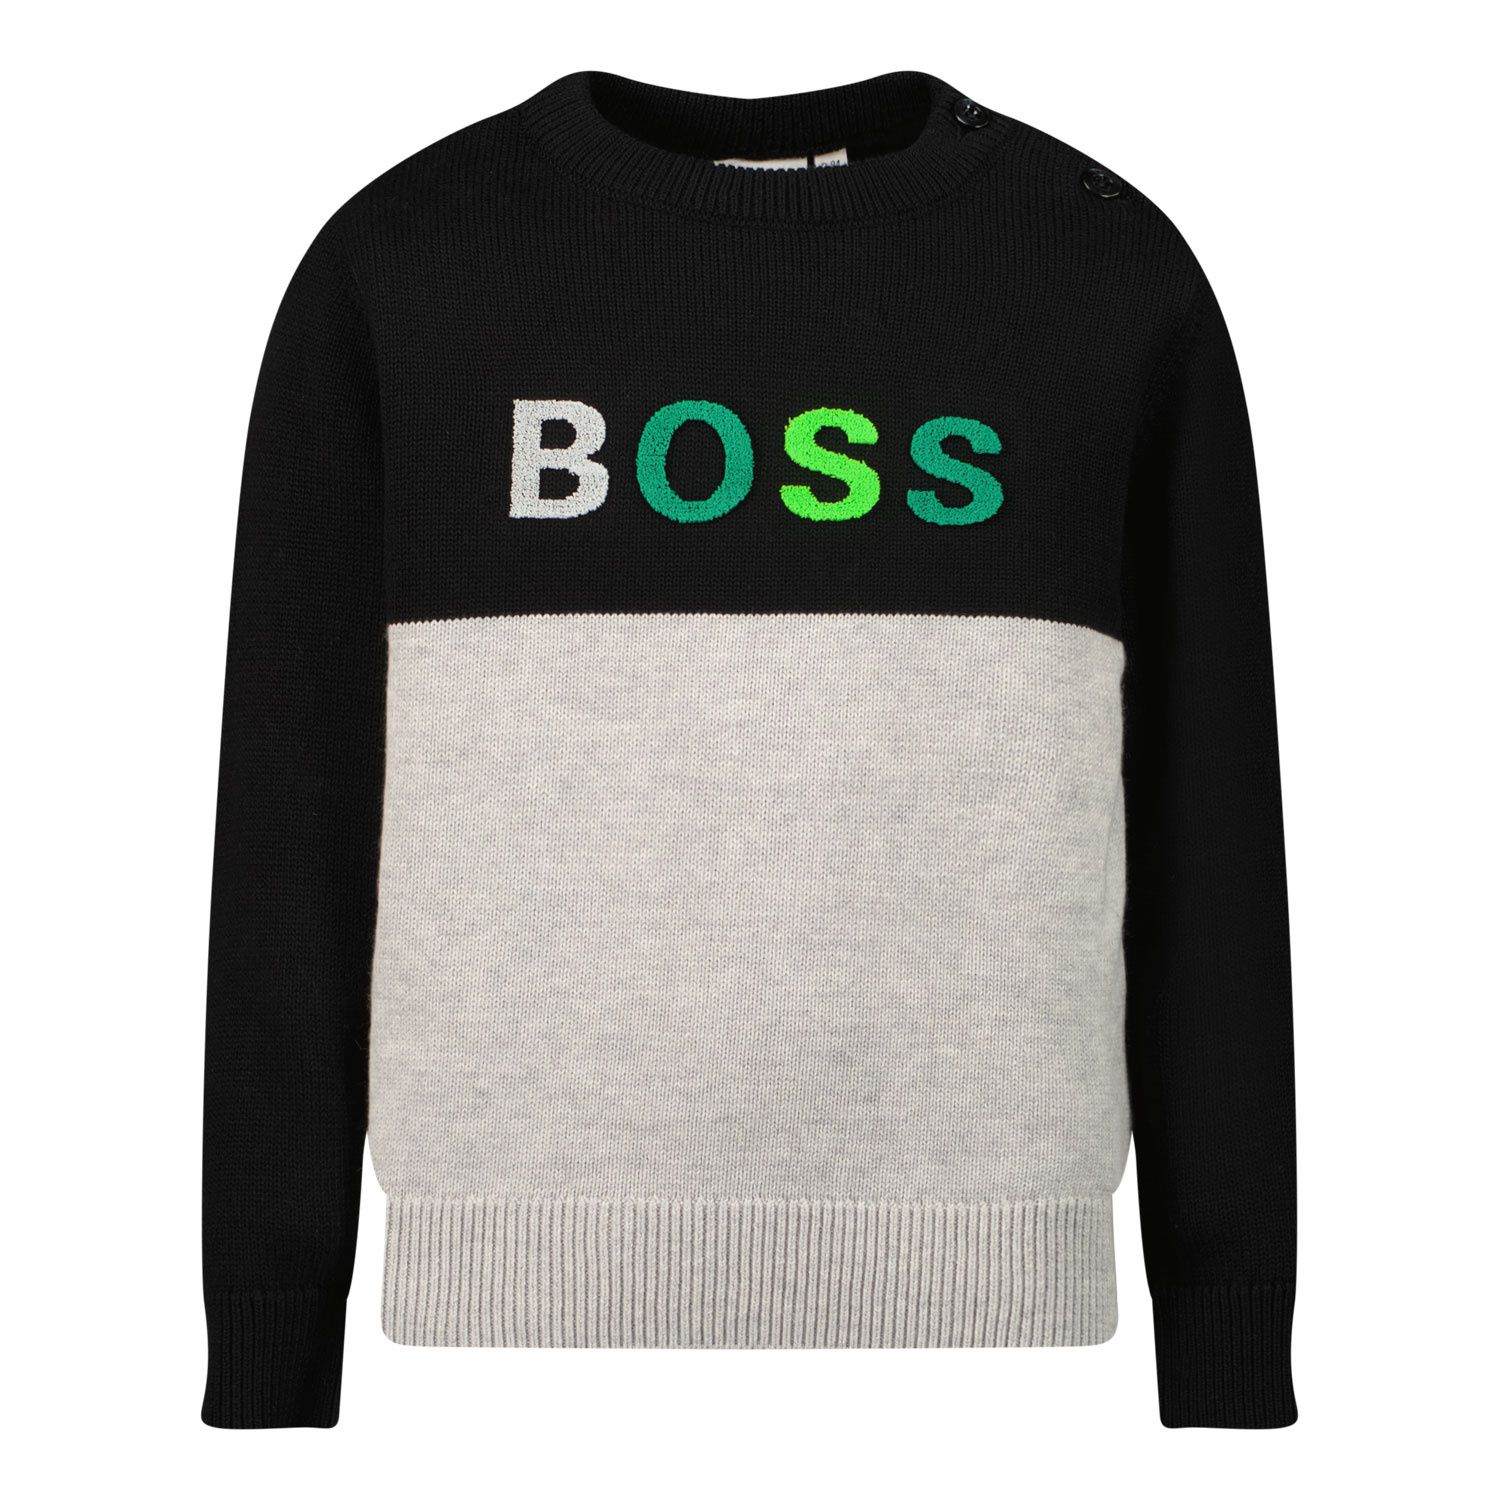 Picture of Boss J05887 baby sweater black